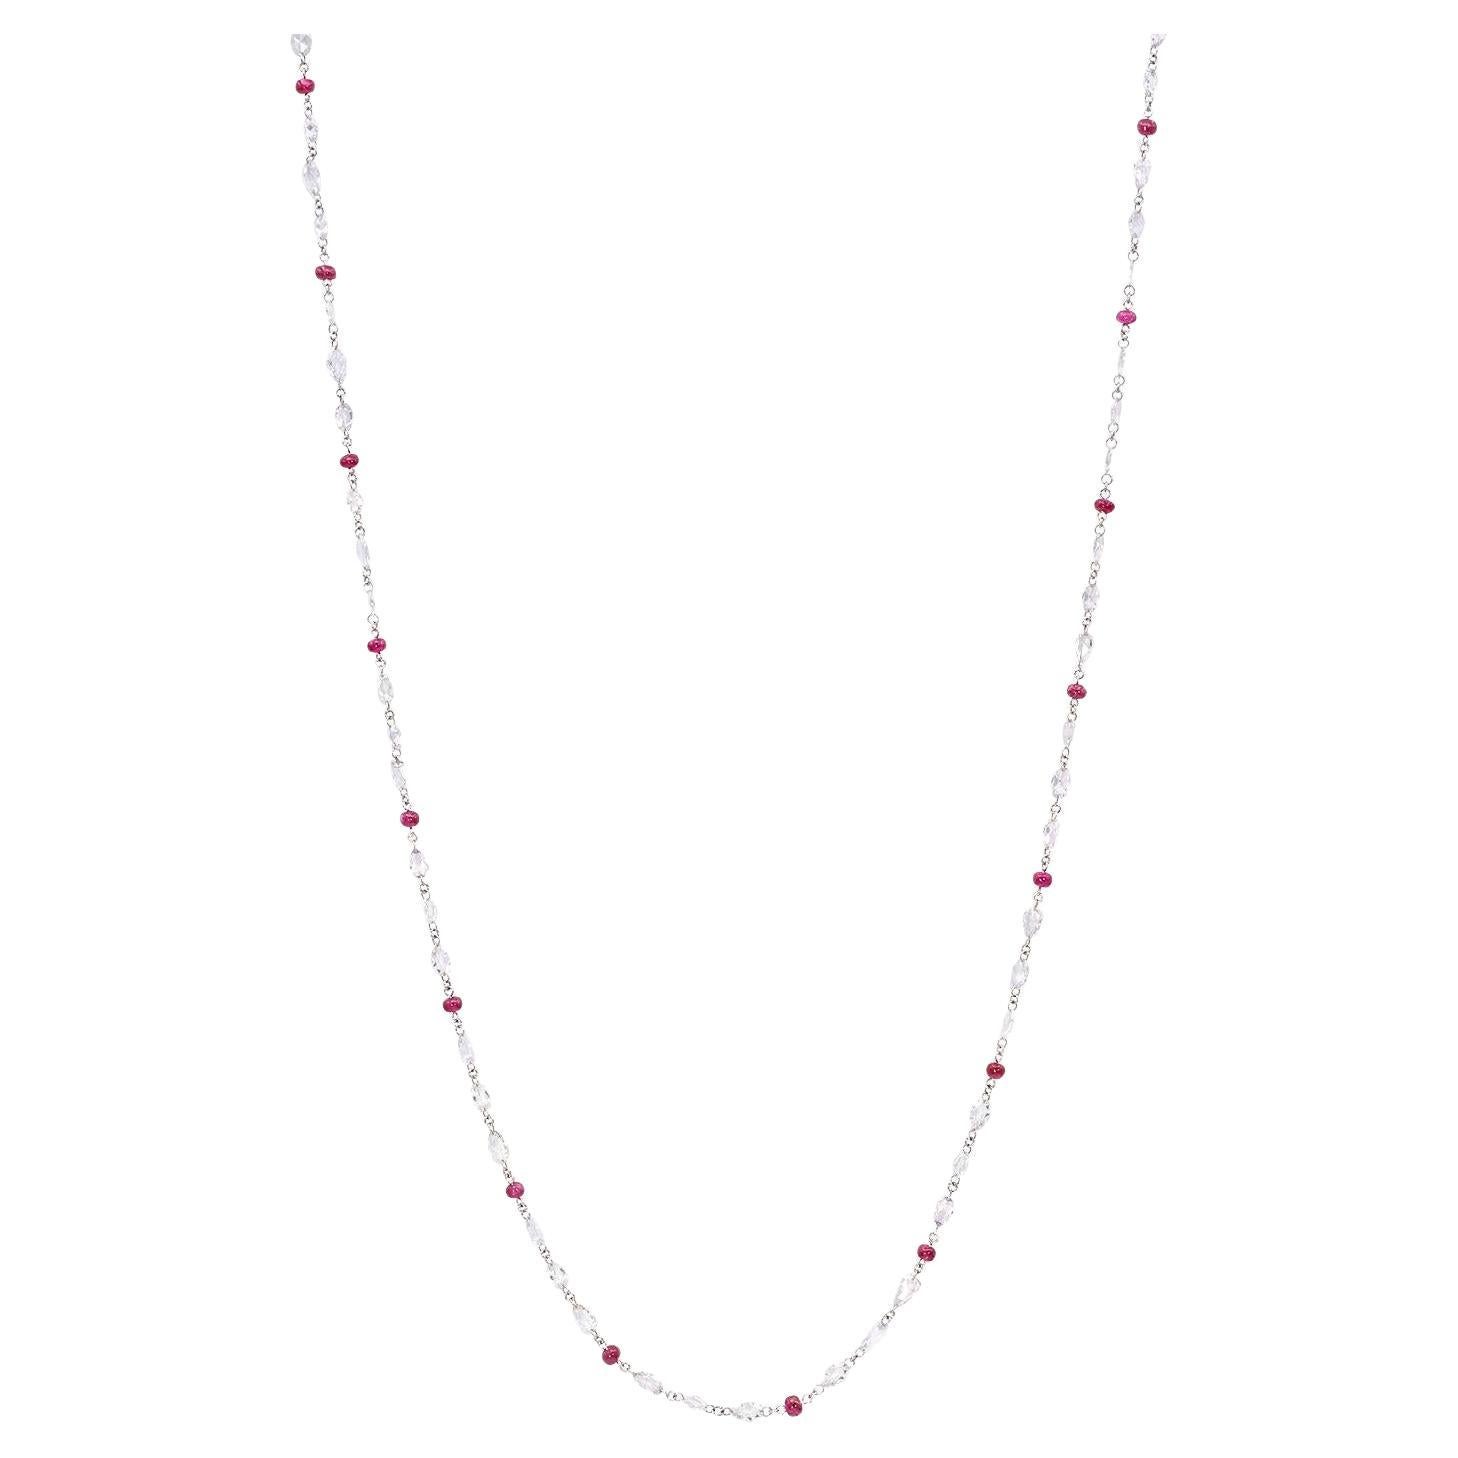 8.52 Carat Diamond and Ruby Platinum Long Chain Necklace For Sale